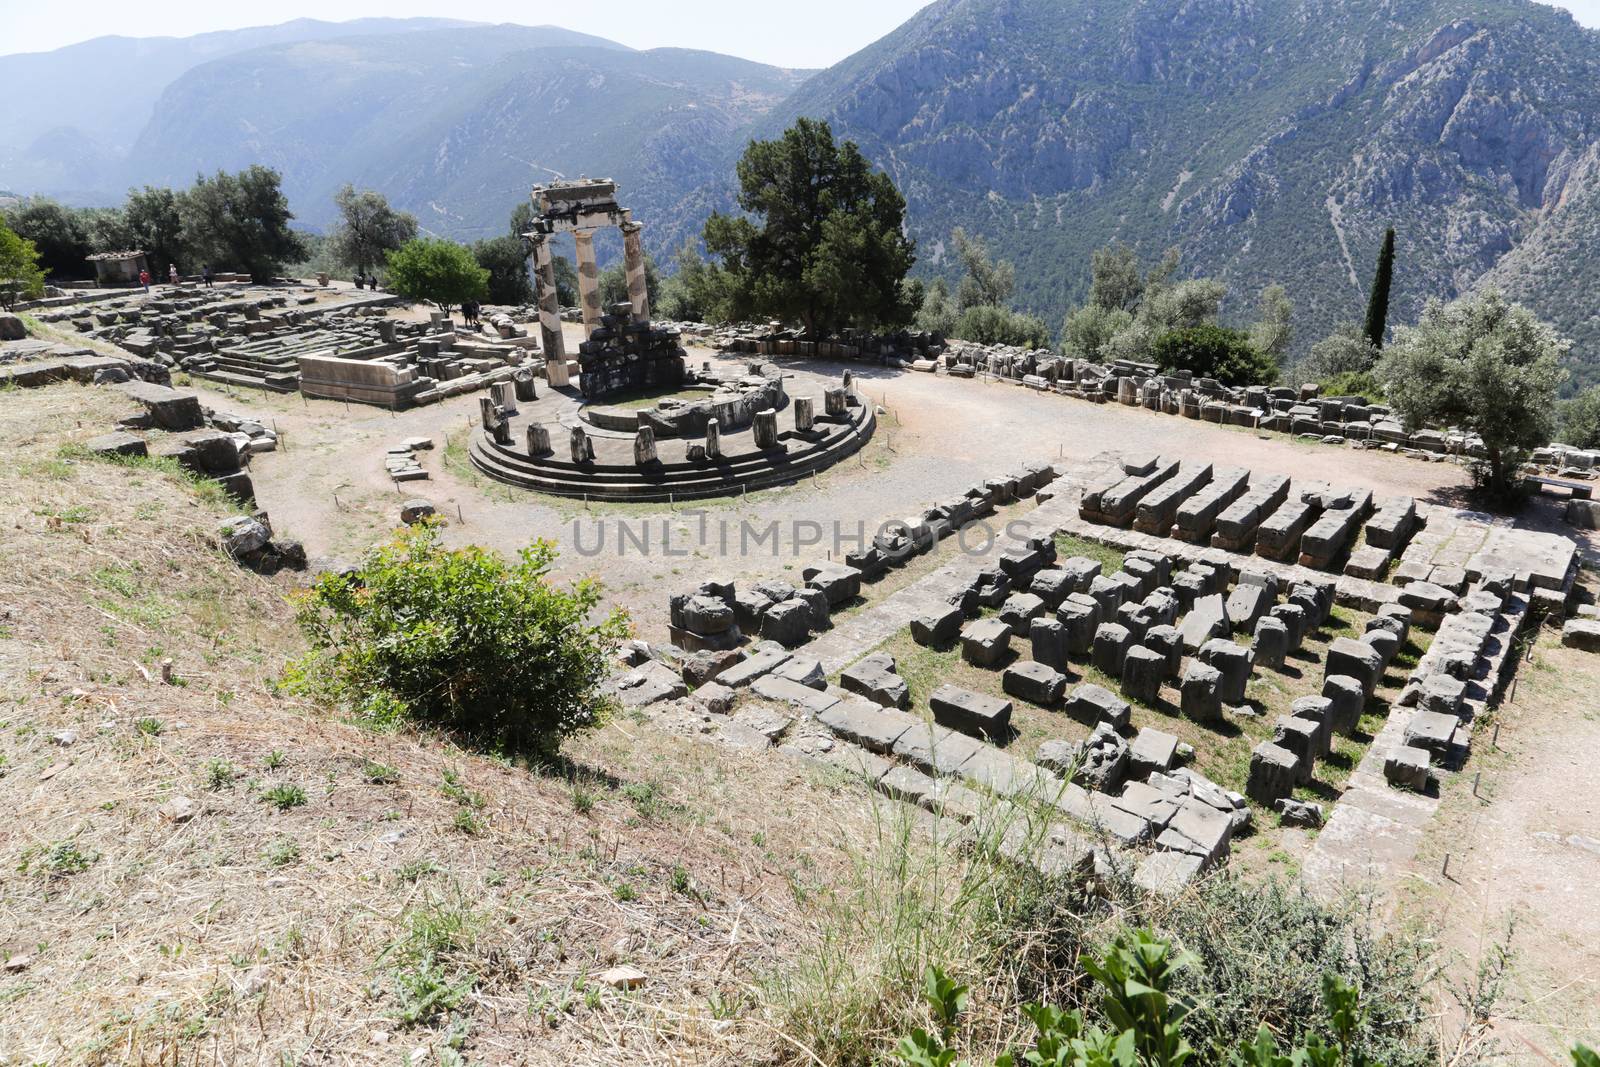 The ruins in Delphi, an archaeological site in Greece at the Mount Parnassus. Delphi is famous by the oracle at the sanctuary dedicated to Apollo. UNESCO World heritage